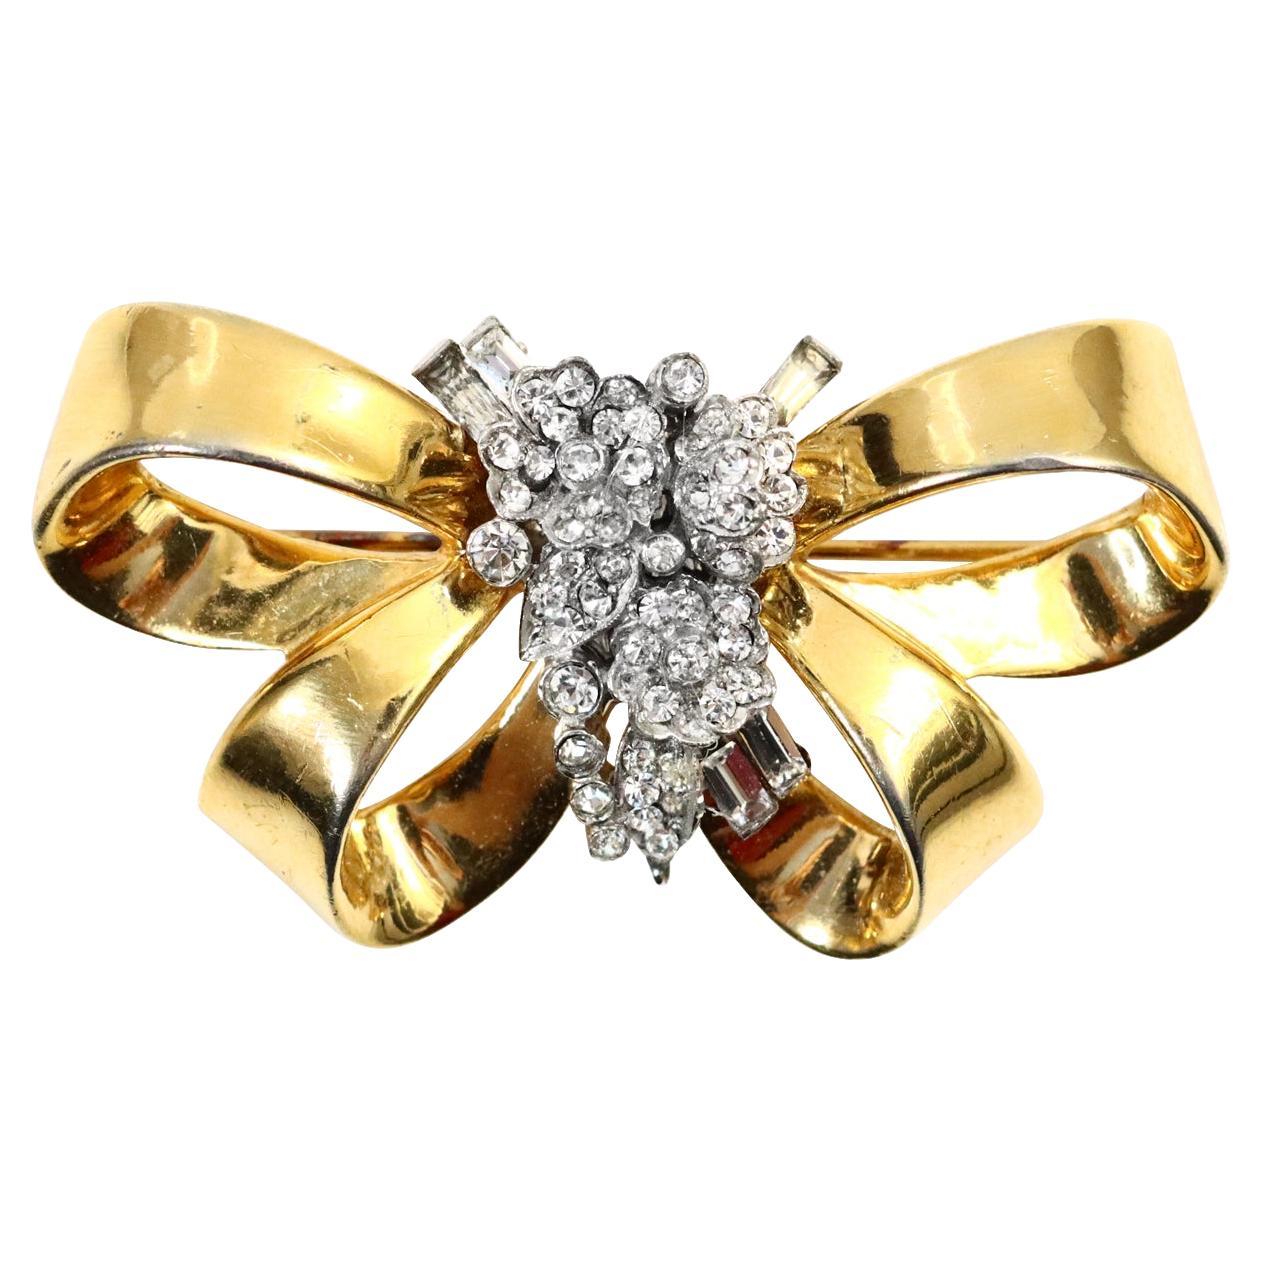 Vintage Mazer Gold Bow Brooch with Diamante Flowers Circa 1960s For Sale